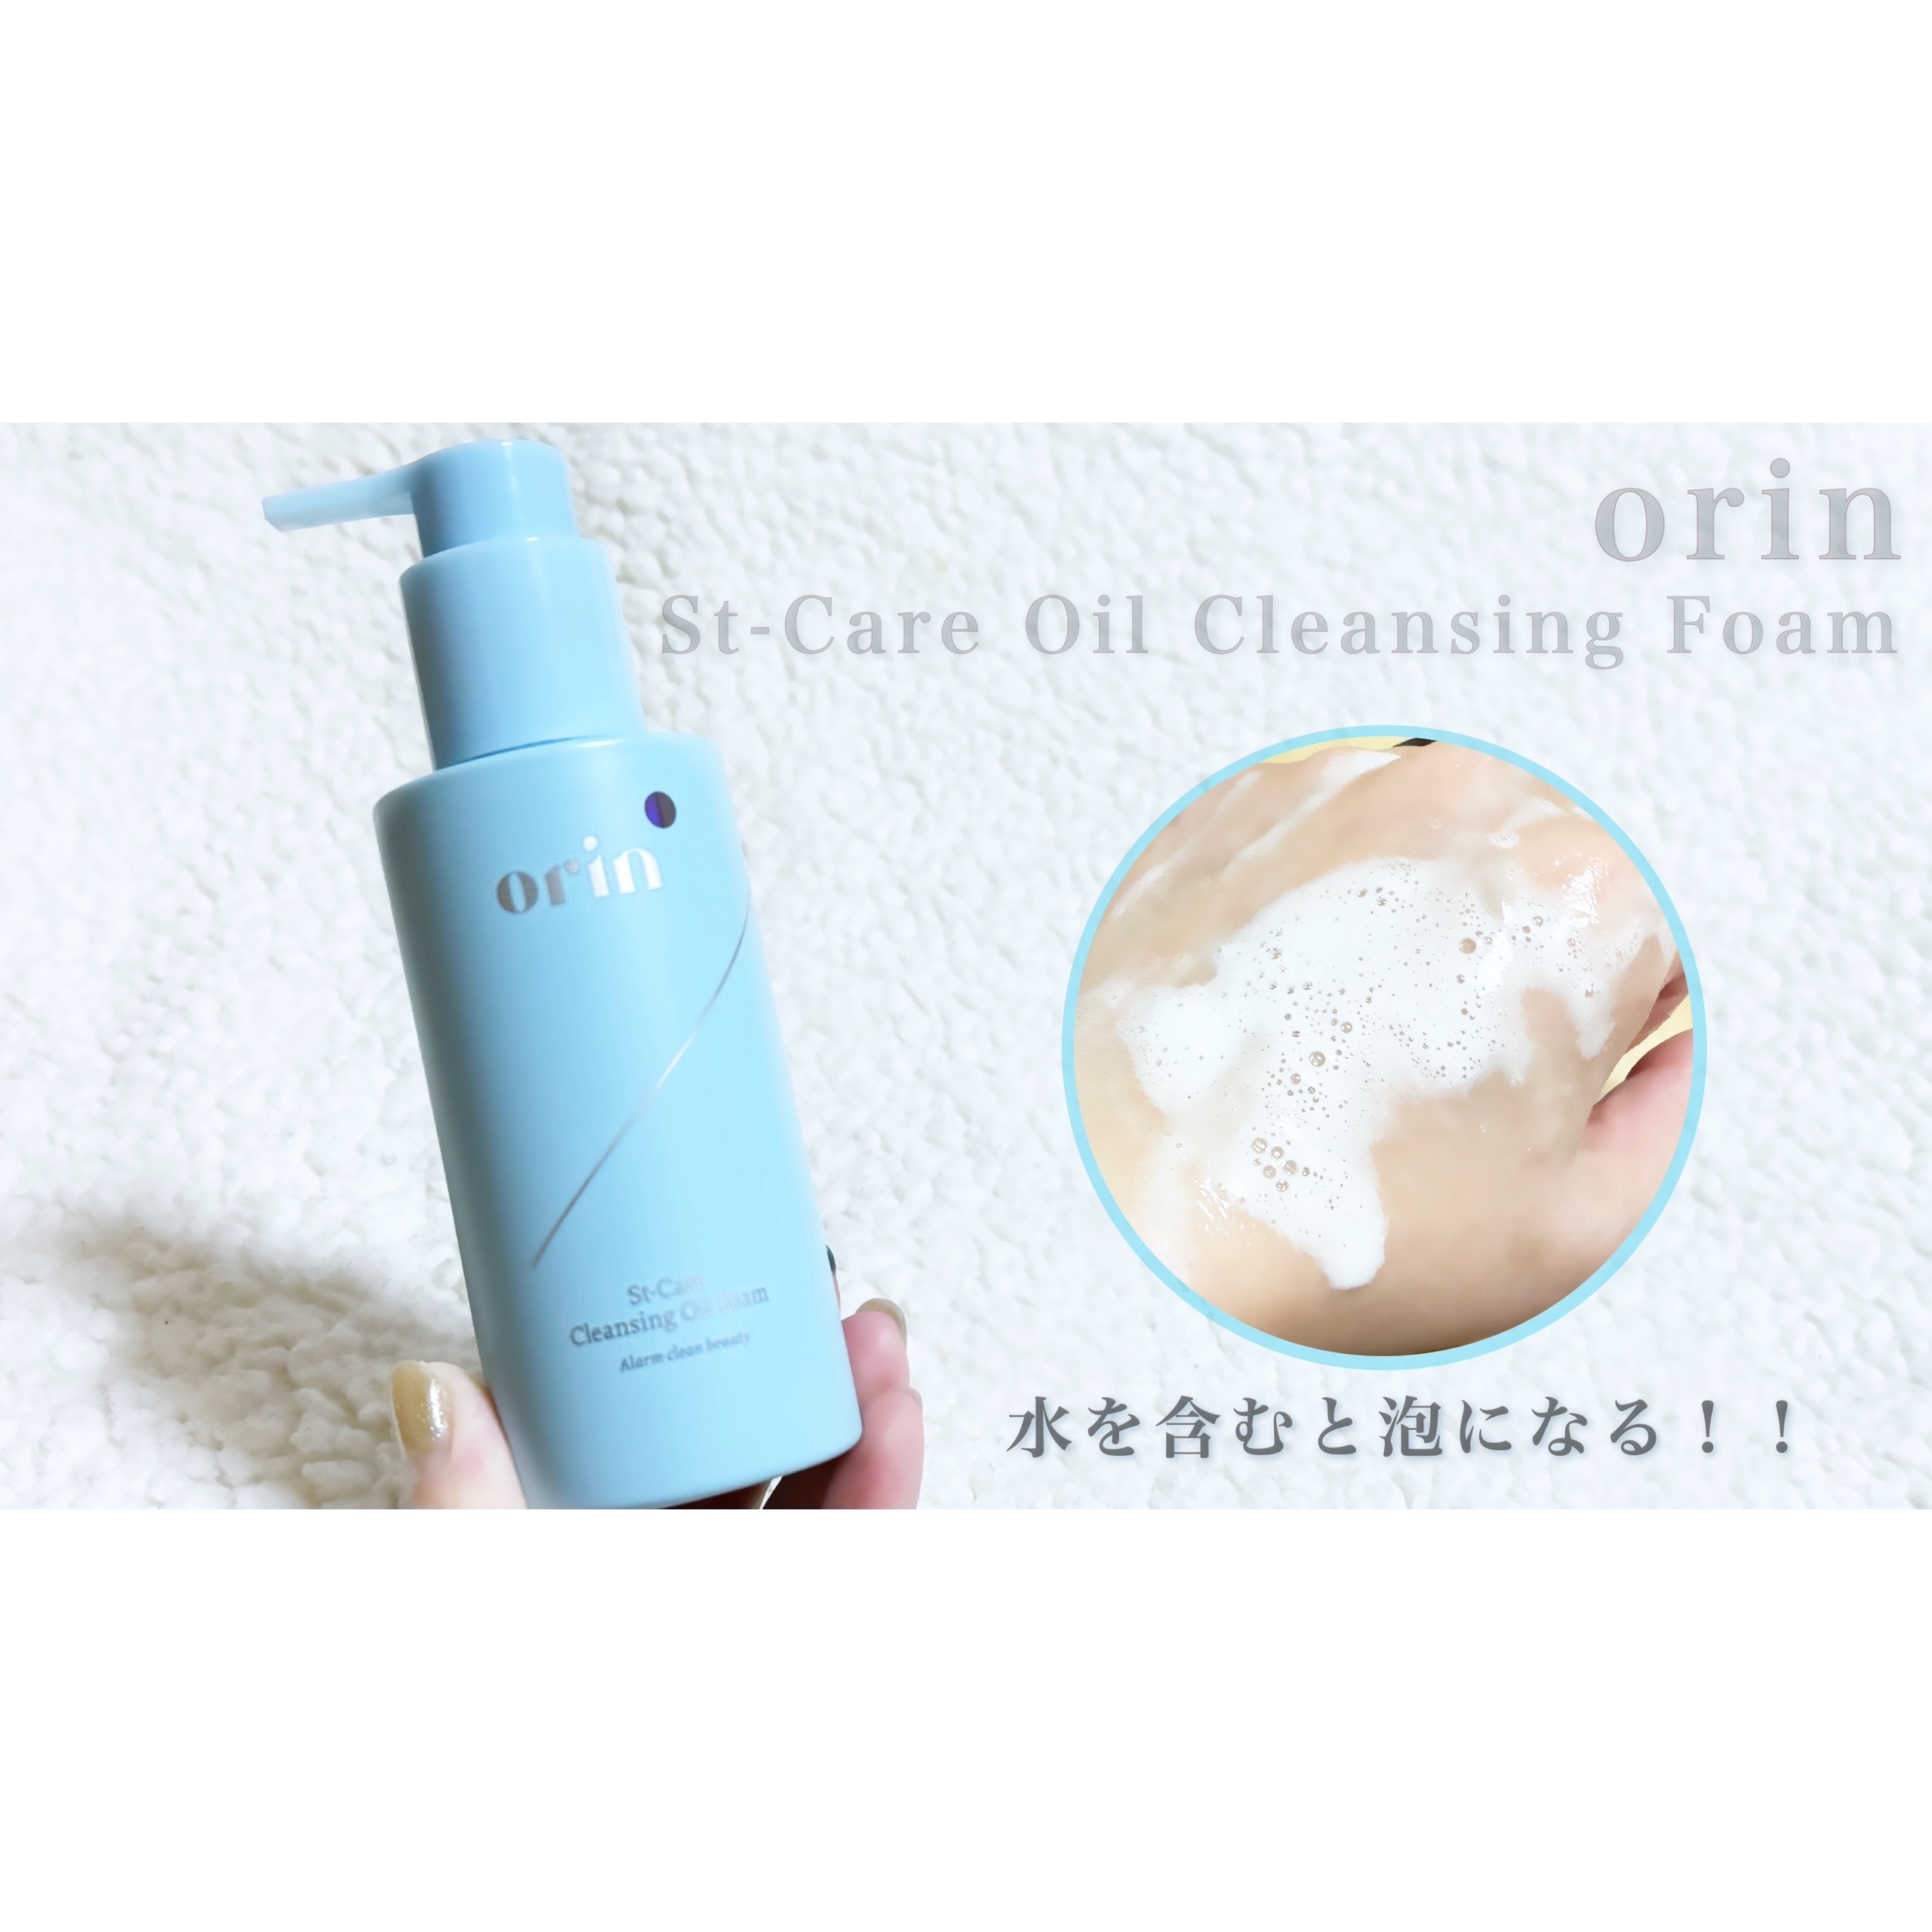 orinSt-Care Oil Cleansing Foamを使ったcosmemo2021さんのクチコミ画像3